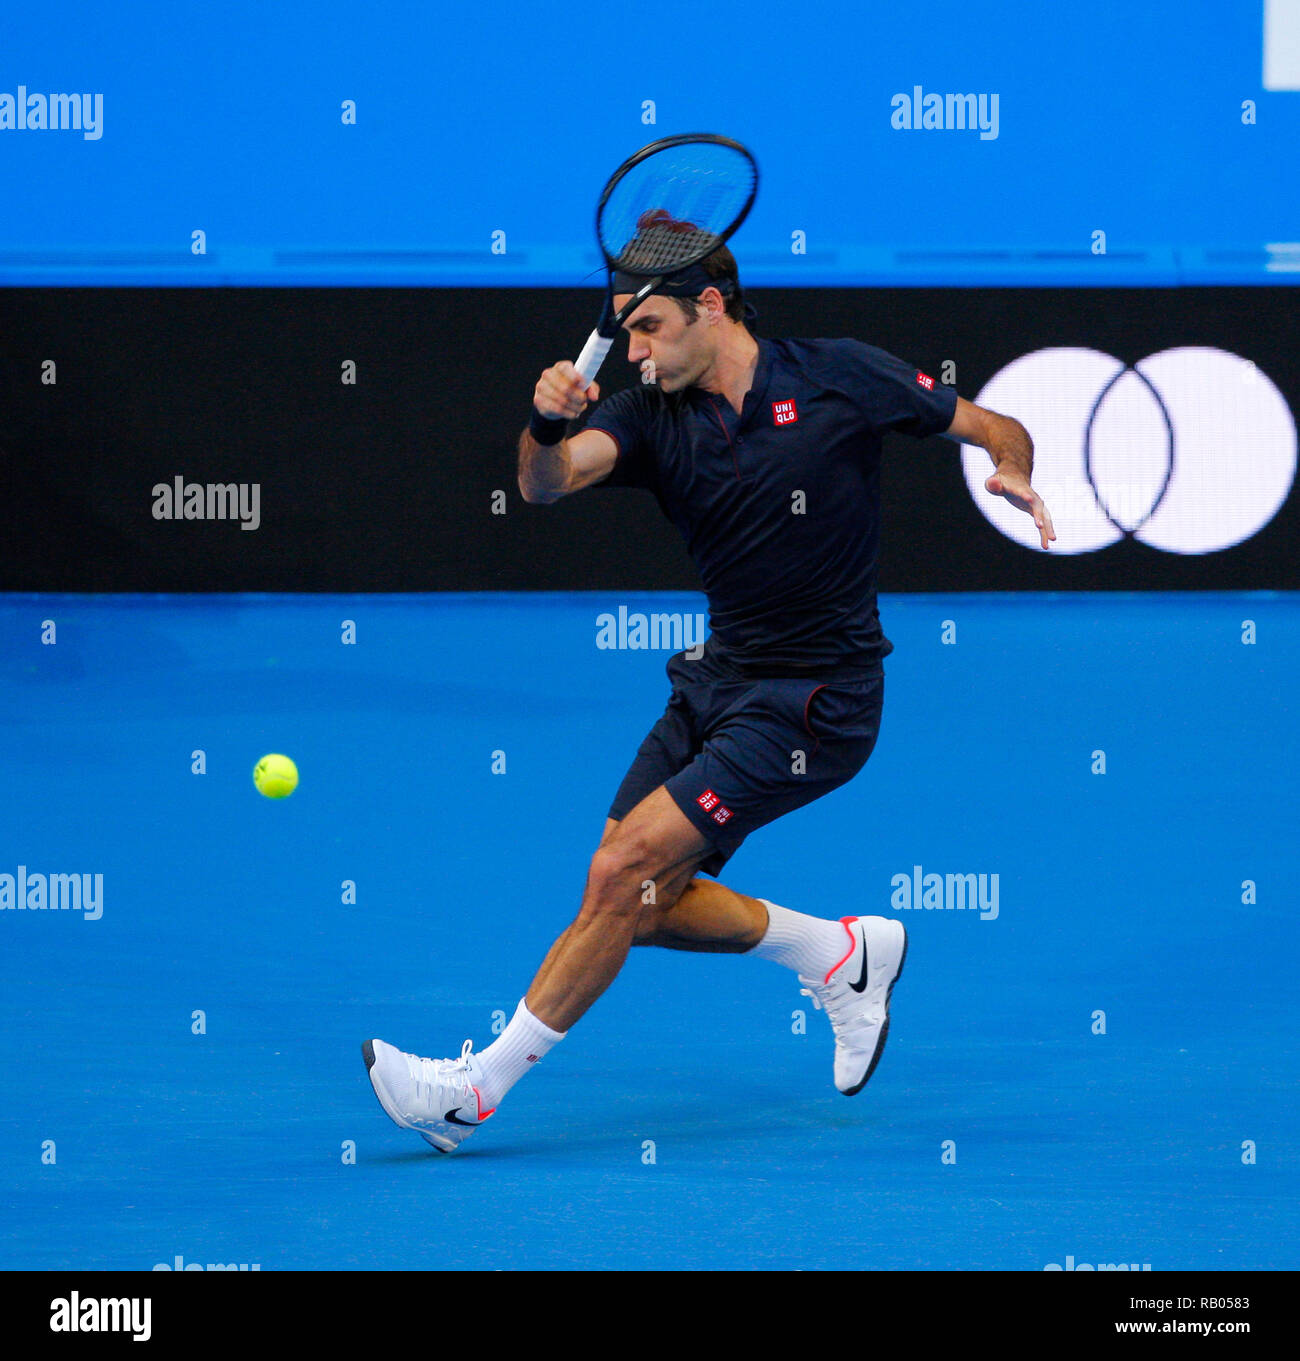 RAC Arena, Perth, Australia. 5th Jan, 2019. Hopman Cup Tennis, sponsored by  Mastercard; Roger Federer of Team Switzerland plays a forehand shot against  Alexander Zverev of Team Germany during the Final Credit: